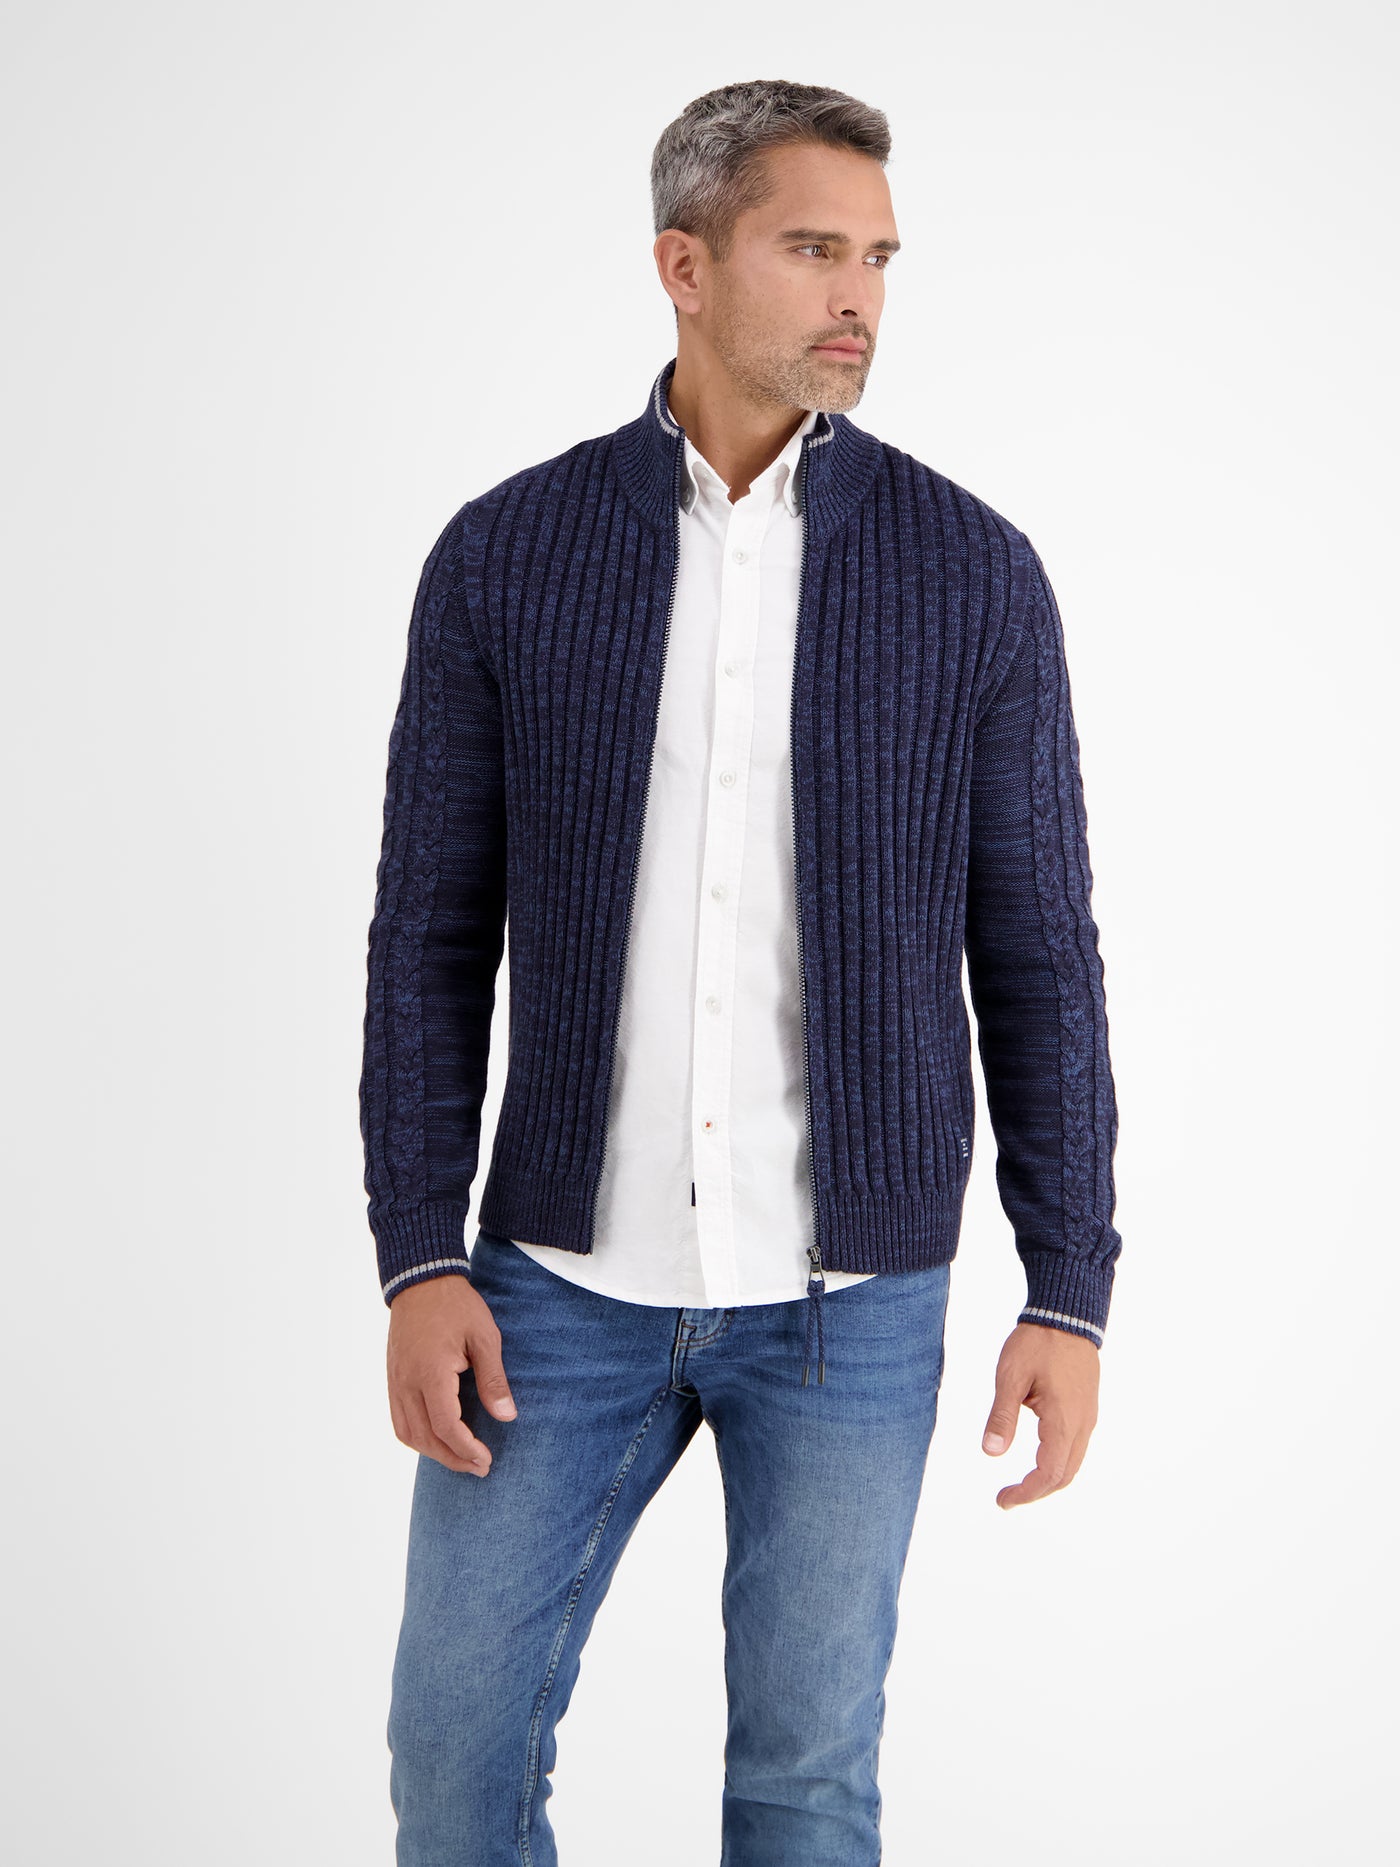 Cardigan, wide ribbed with stand-up collar